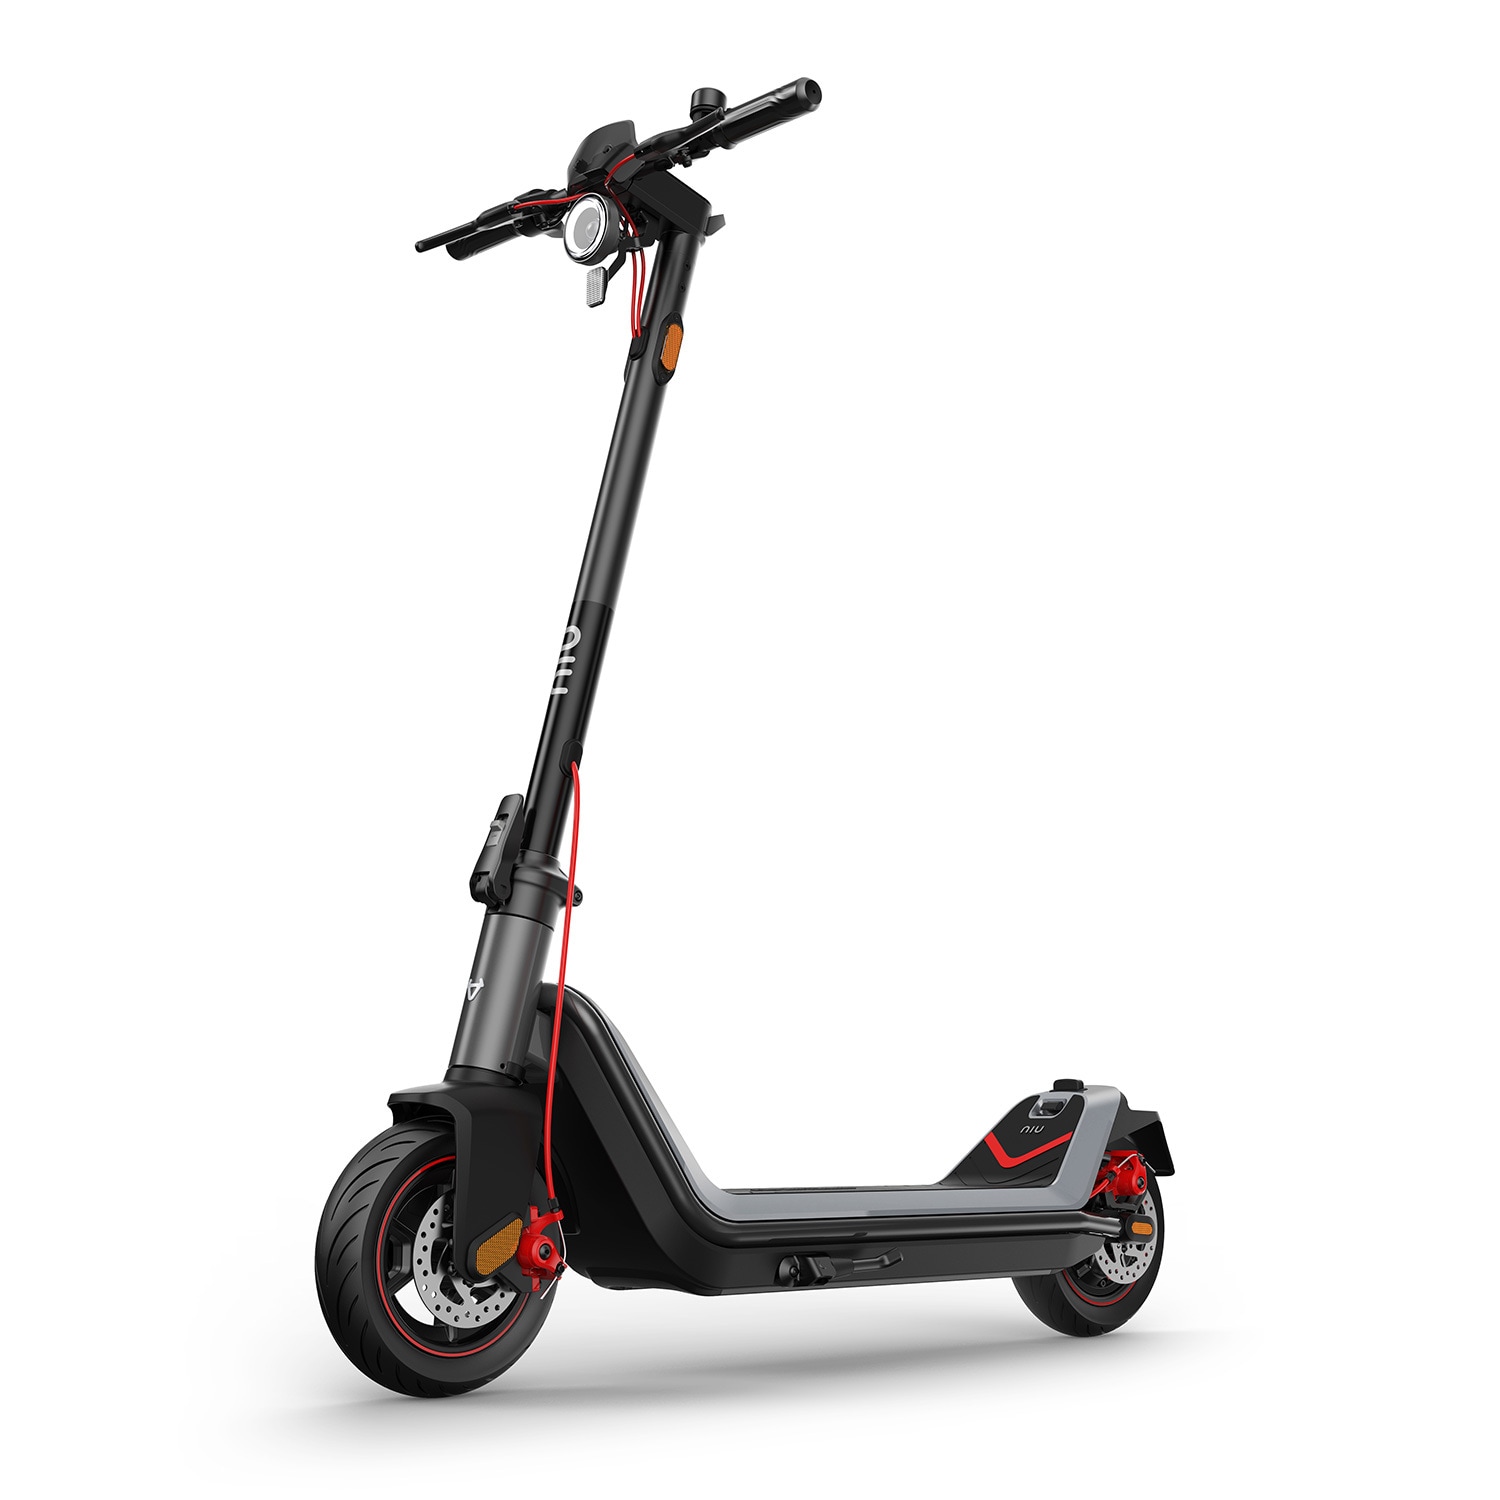 NIU Niu Electric Scooter Kqi3 Max Space Grey;450w Power, 40-mile Long  Range, Max Speed 23.6mph, 25% Hill Climbing, 265lbs Max Load, Self-healing  Tires, Portable Folding Electric Scooter For Adults, Ul Certified in